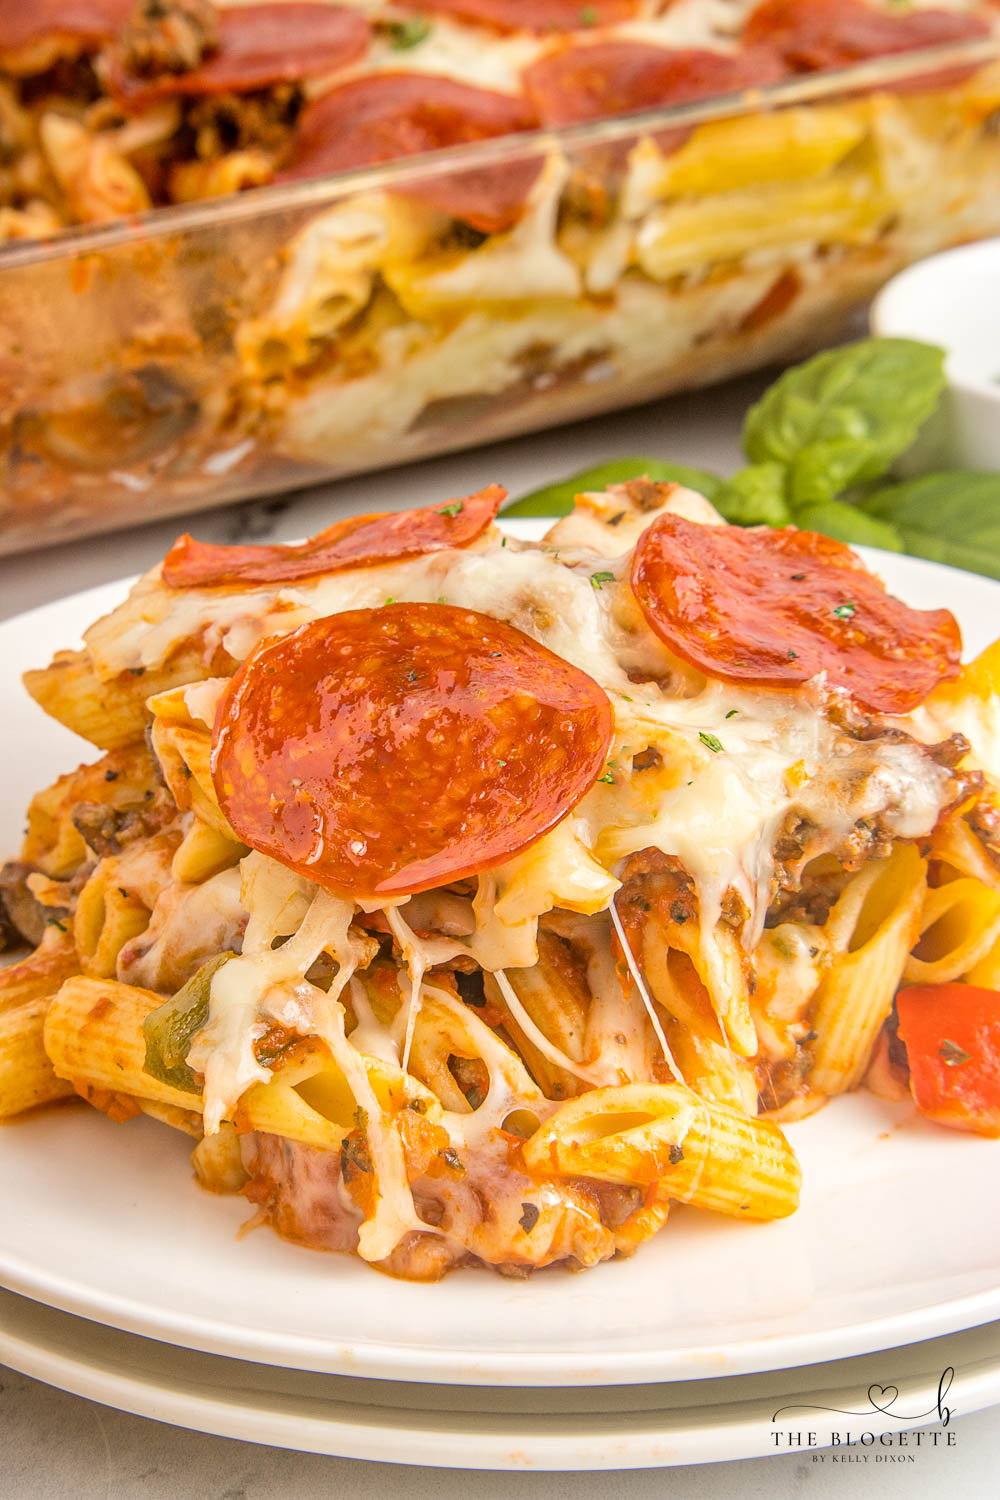 Pizza casserole has layers of pasta, sauce, and ooey-gooey cheese, along with your favorite pizza toppings.